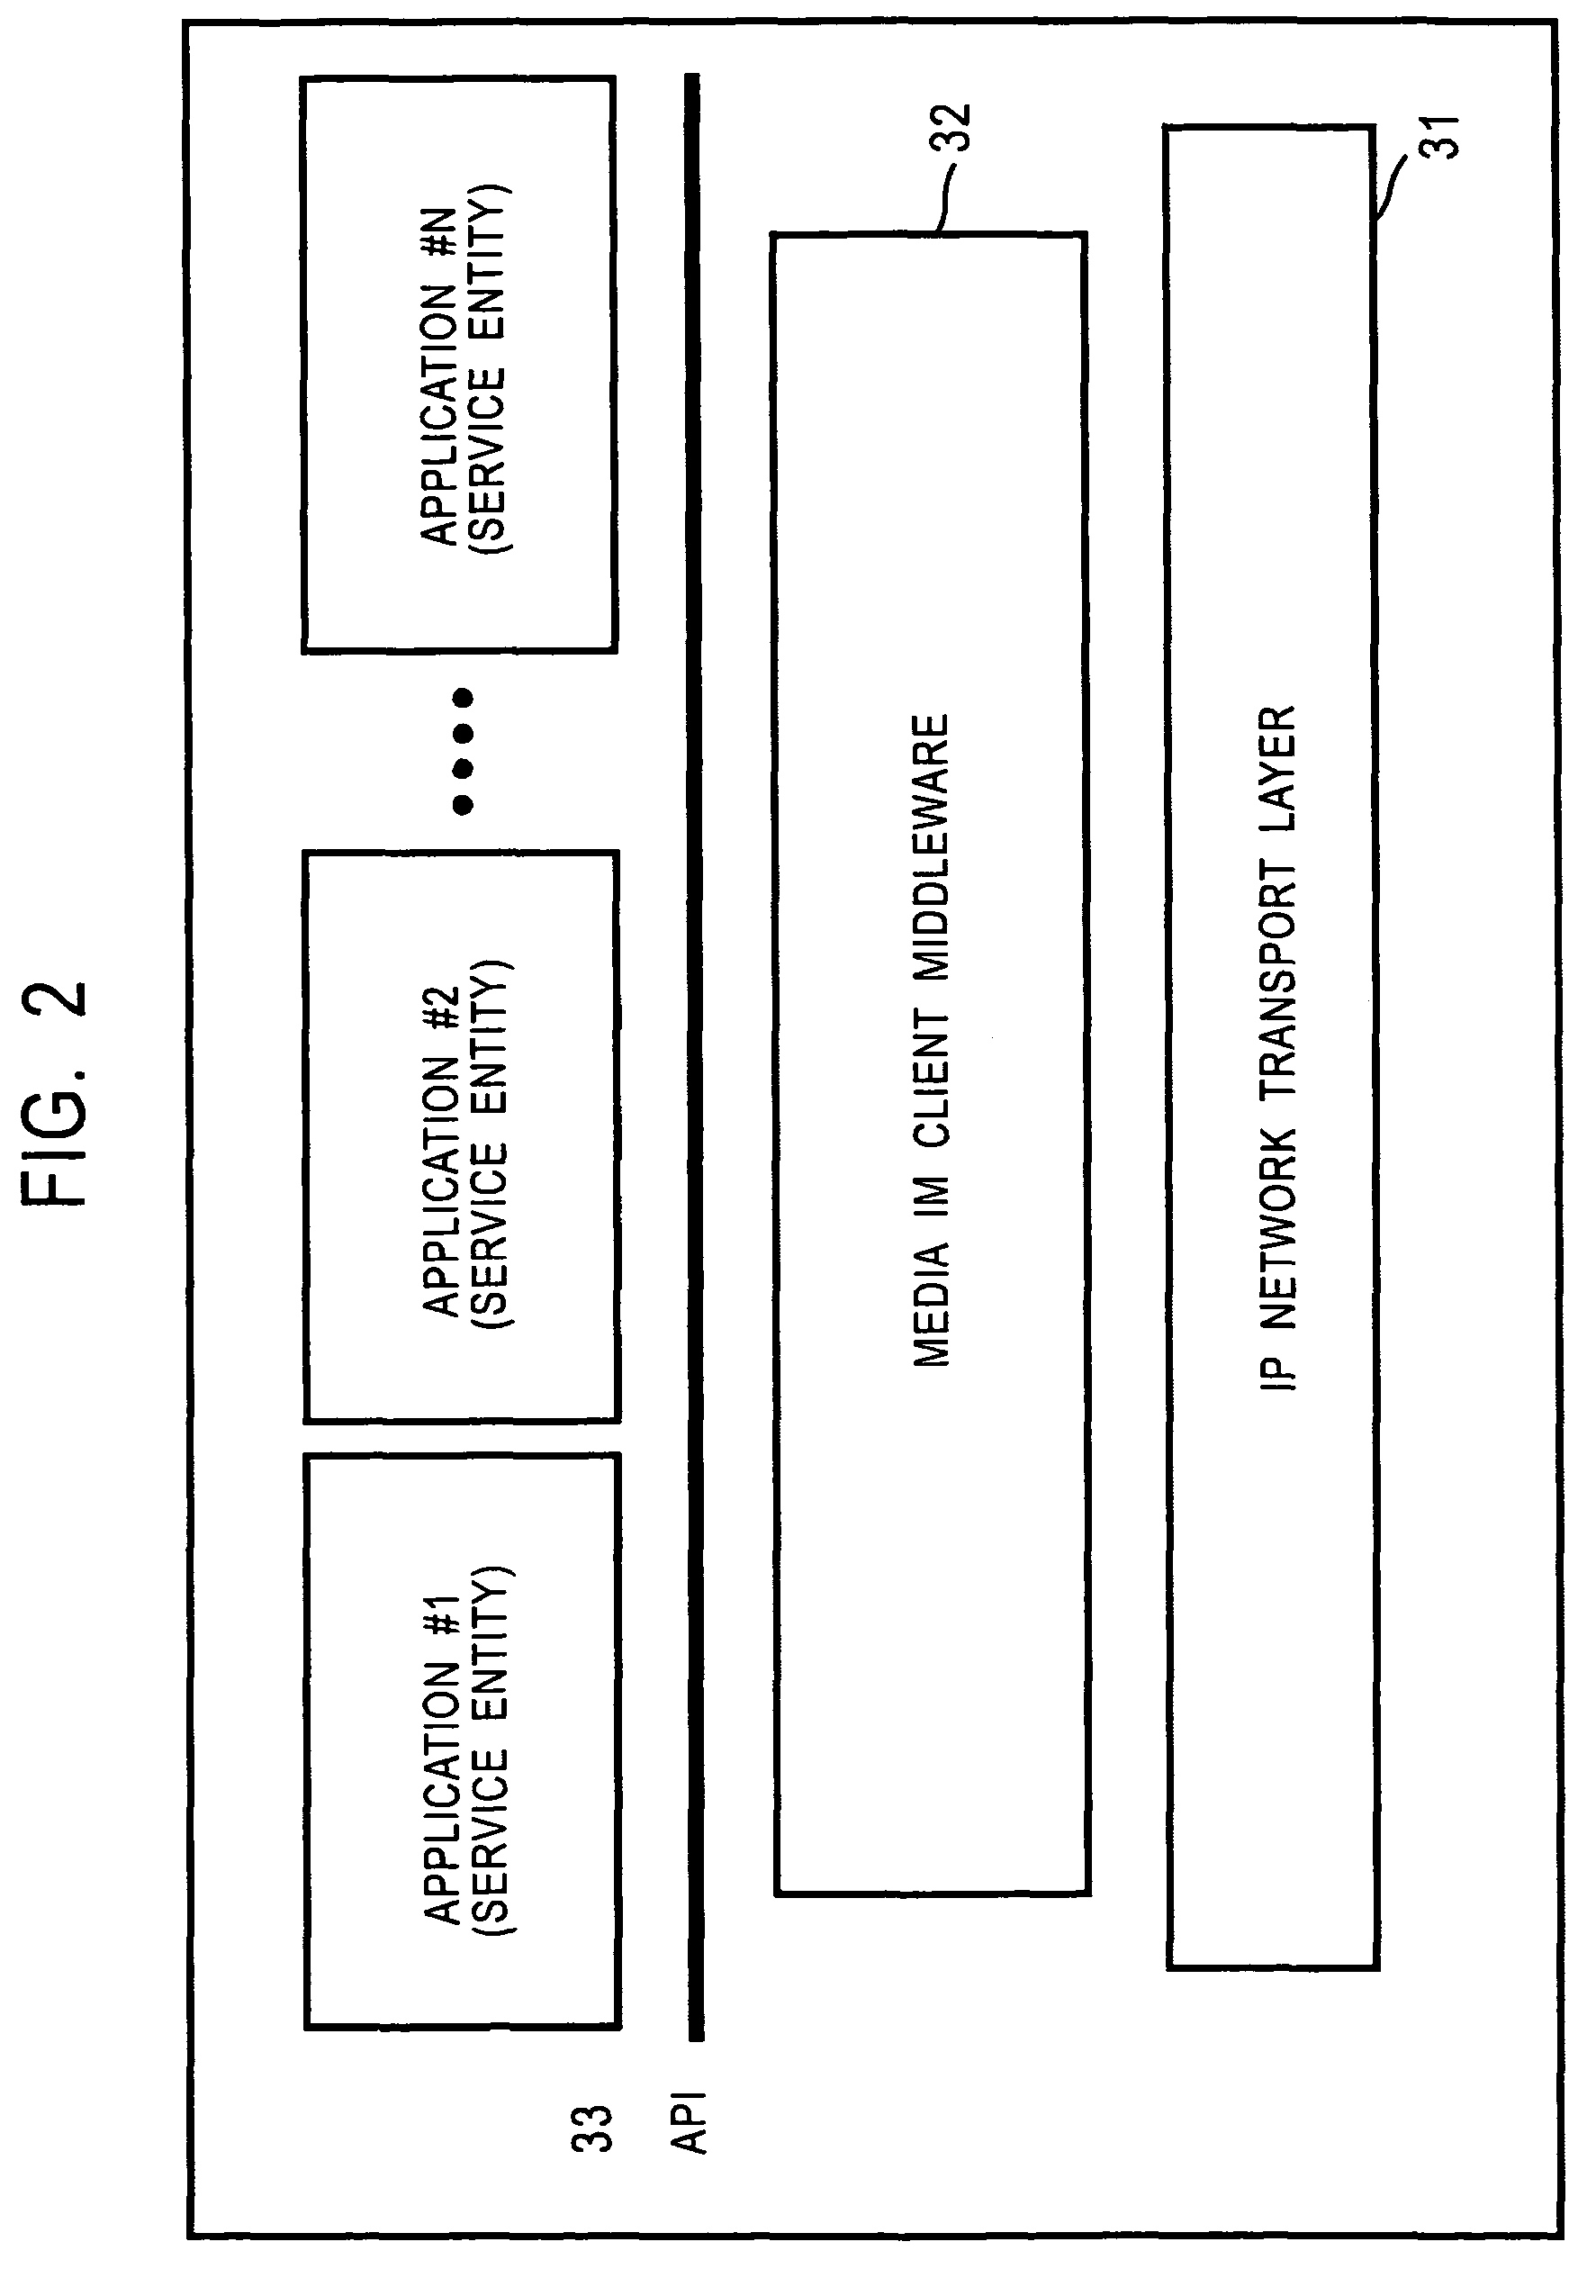 Program, information processing method and device, and data structure